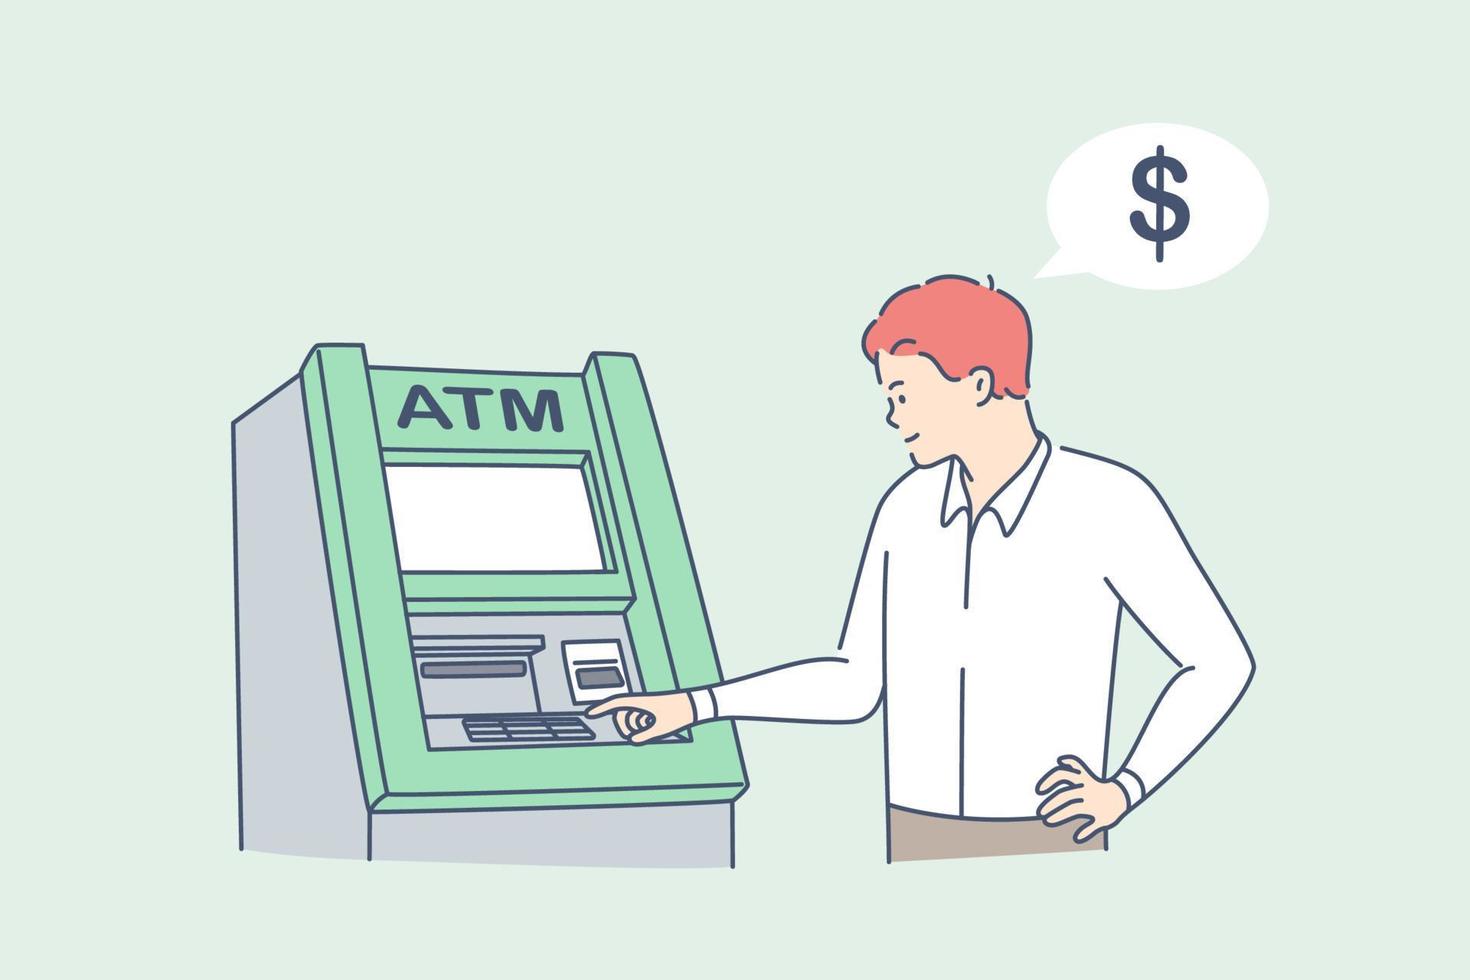 Withdrawing money on atm concept. Young man standing entering pincode on atm machine for getting money cash vector illustration